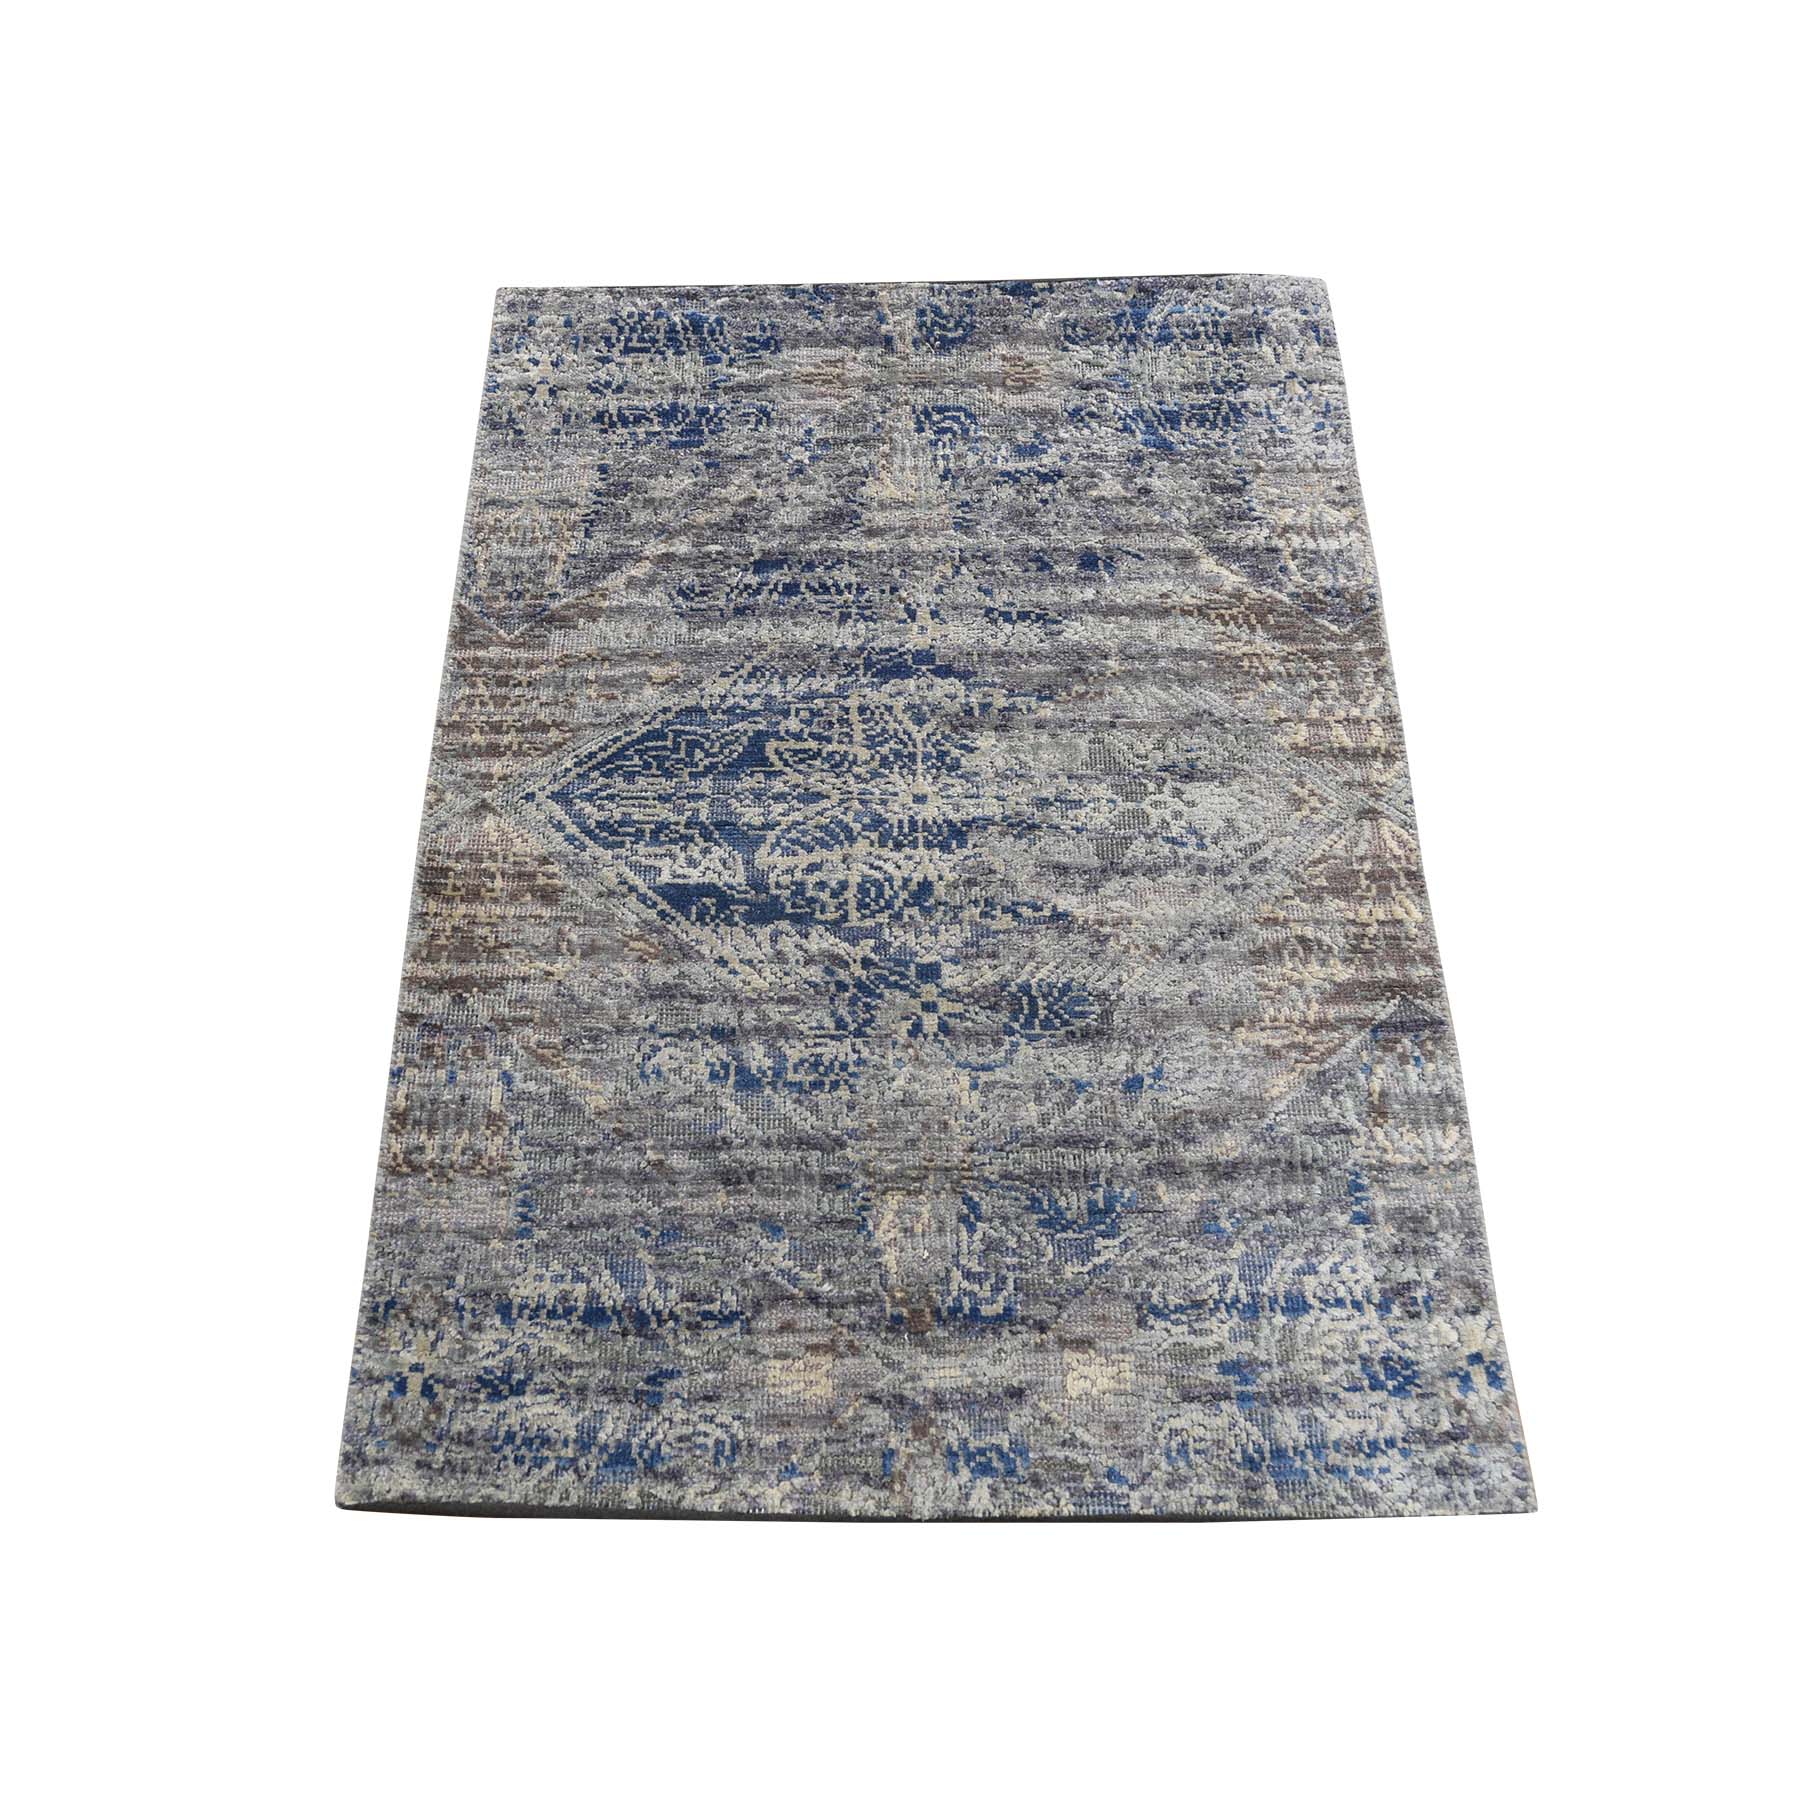 N/A Silk Hand-Knotted Area Rug 2'0